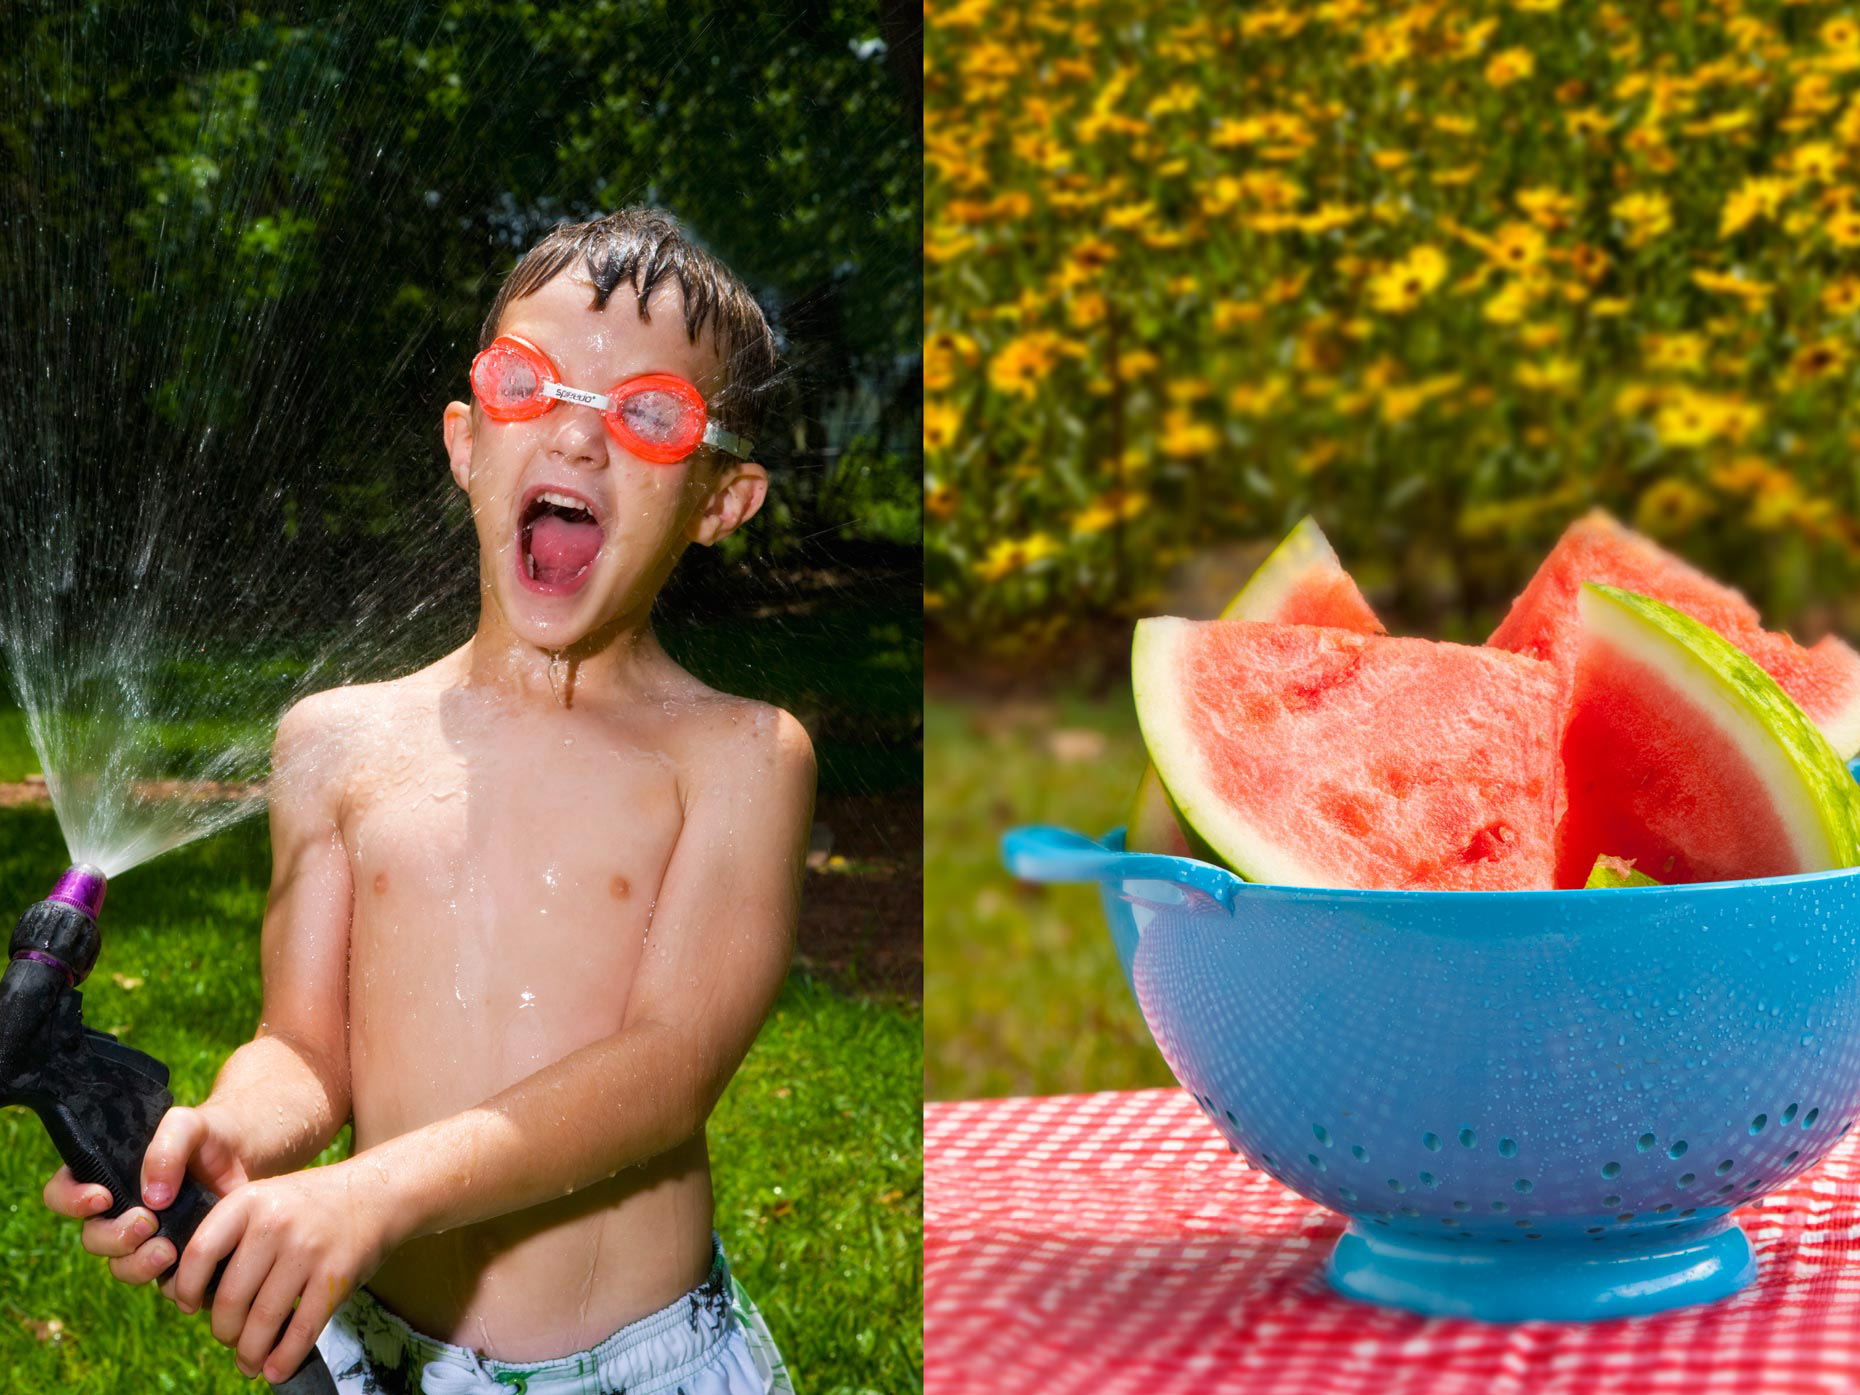  Lifestyle Photography | Boy In Summer & Watermelon